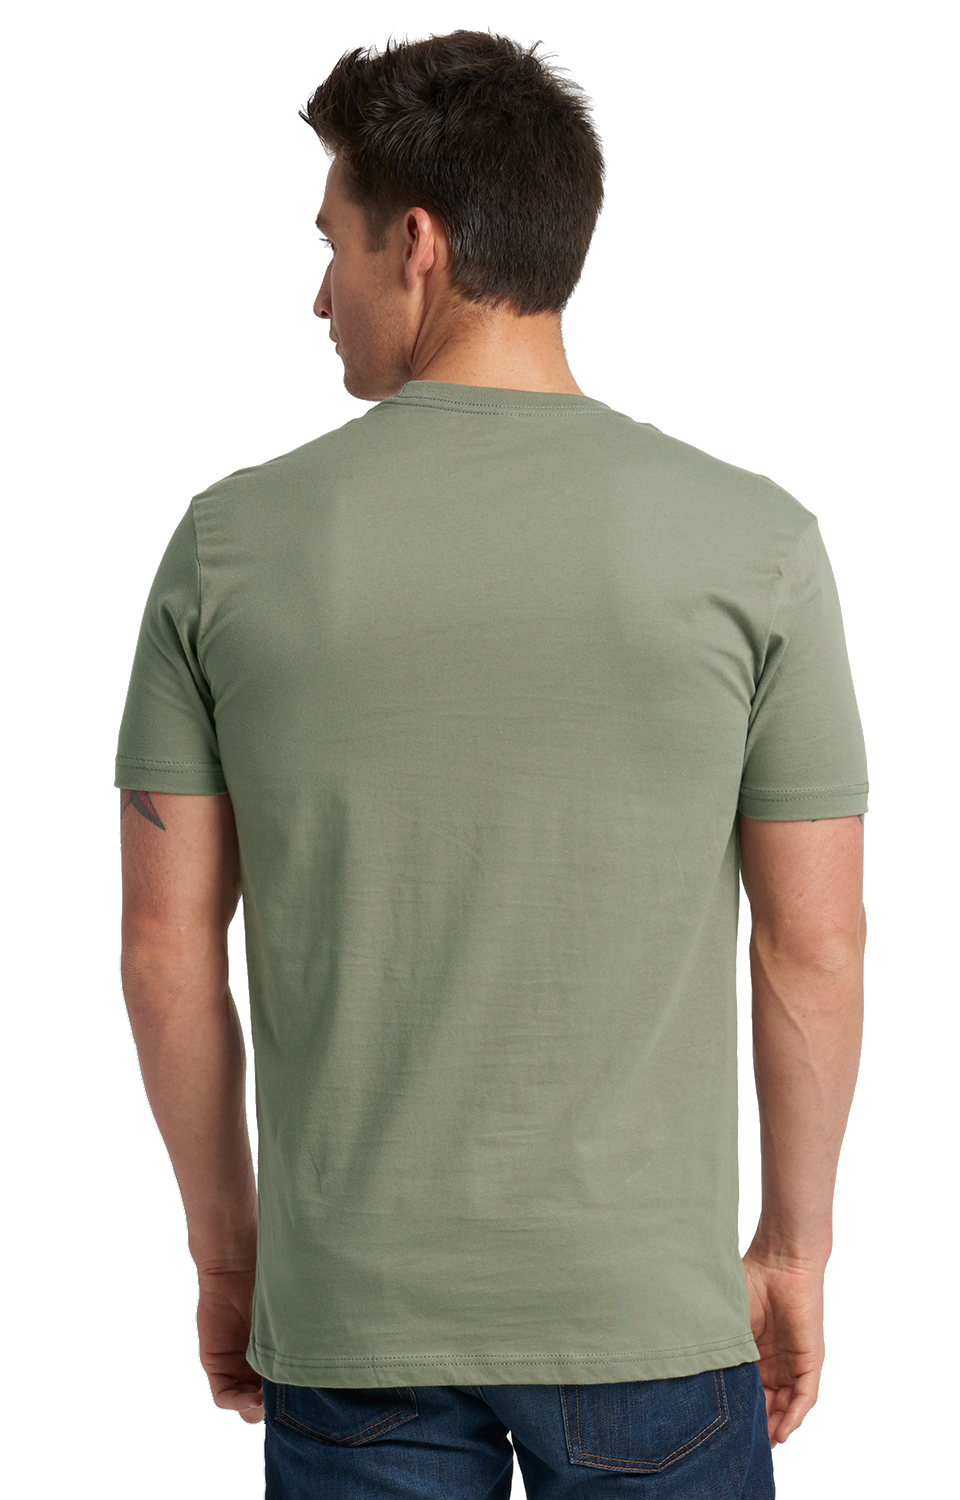 All Sizes Available New 2021 ESP Green/Olive Minimal T Shirt 